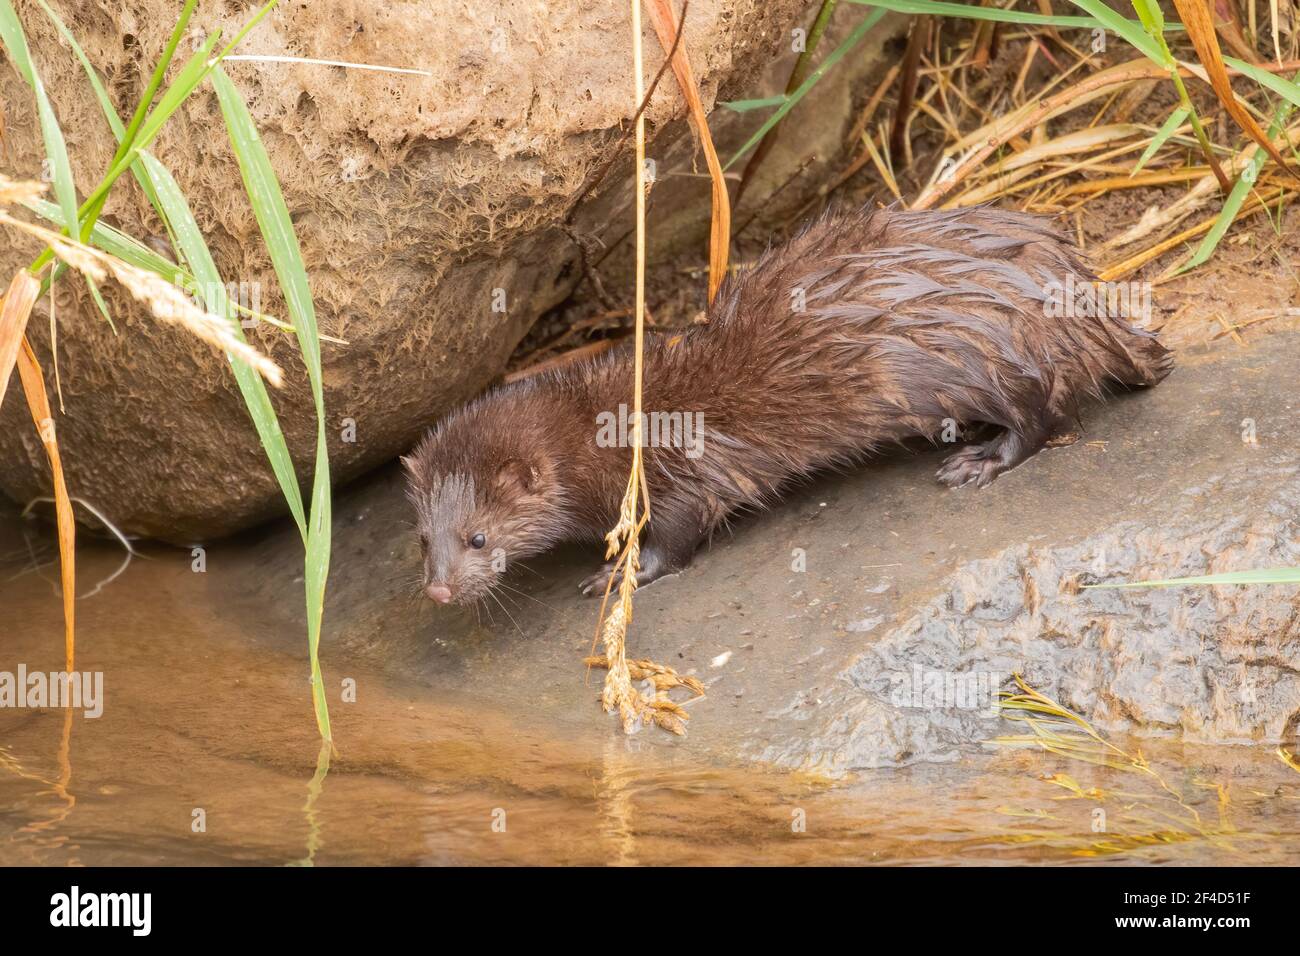 A mink near the water's edge. Stock Photo